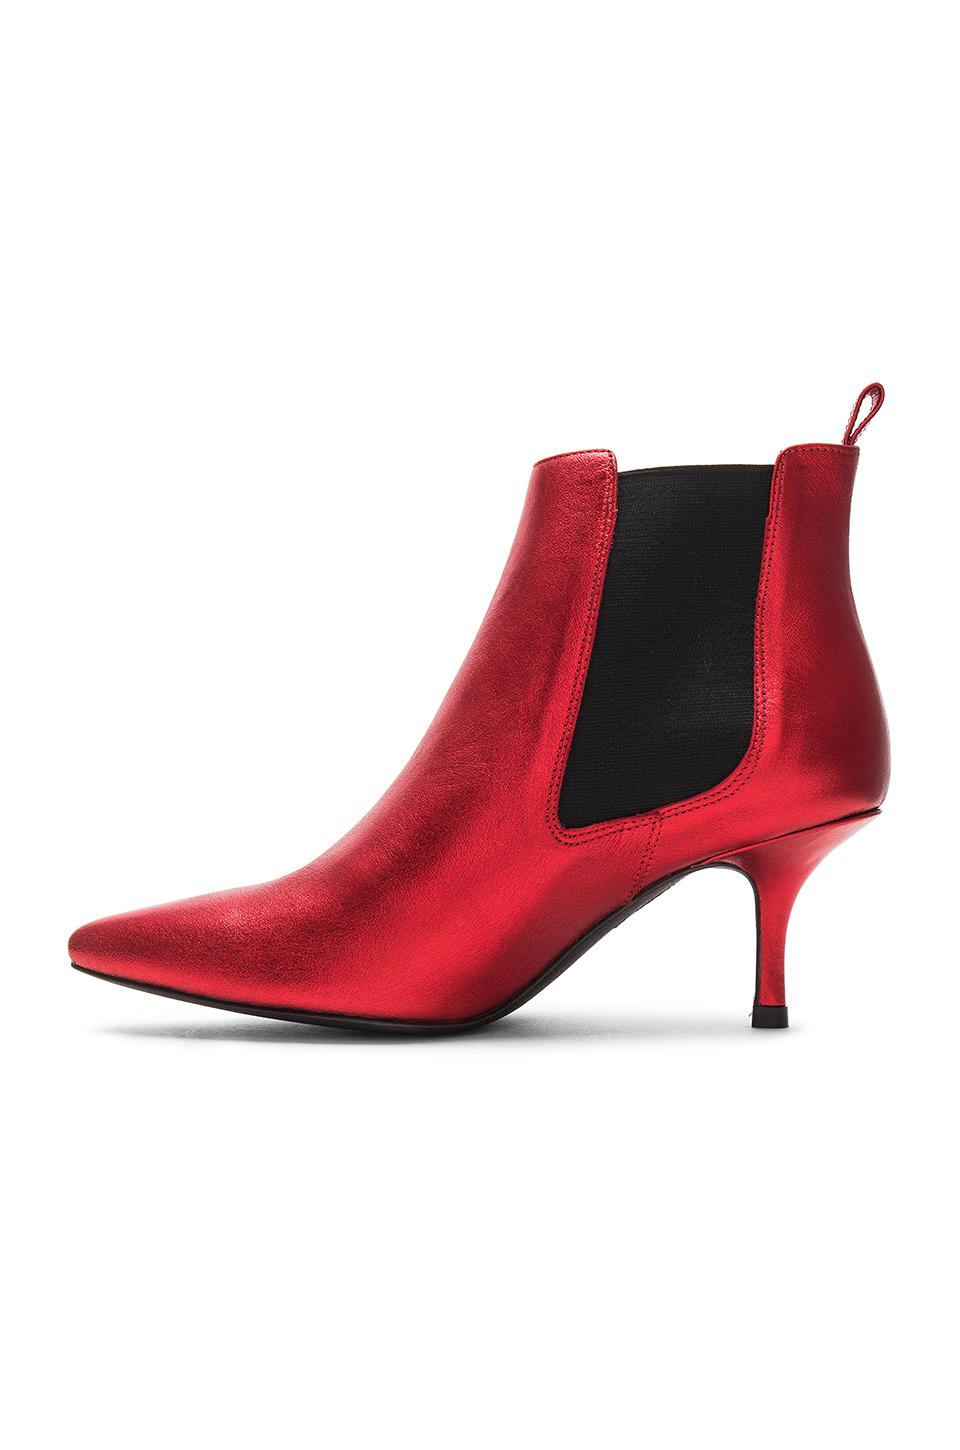 Anine Bing Leather Stevie Ankle Boots in Red - Lyst